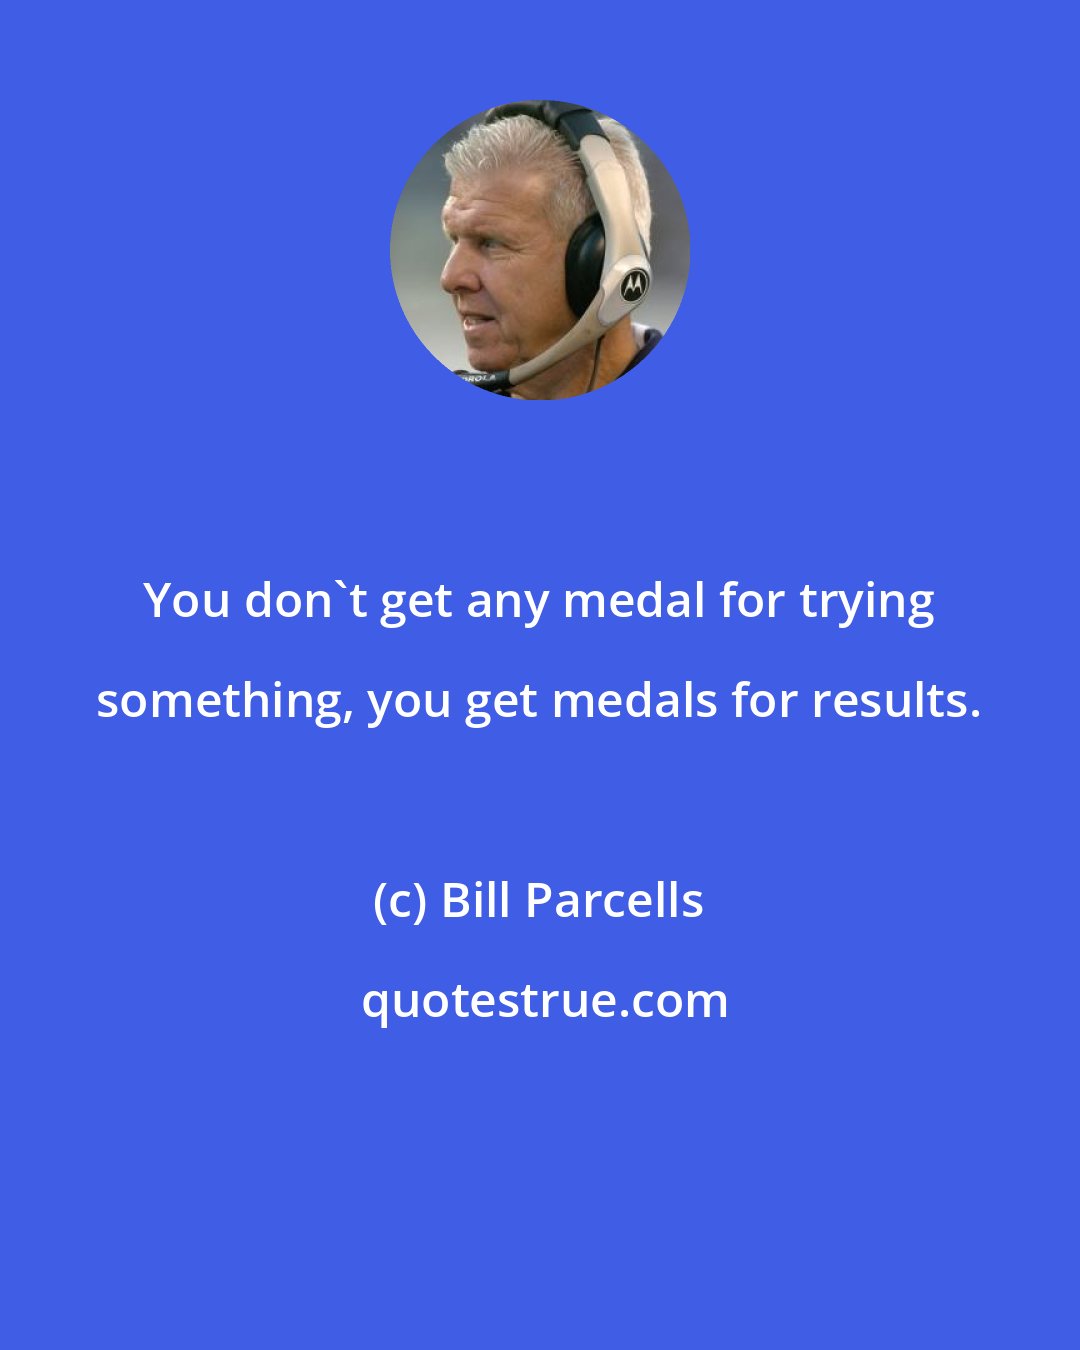 Bill Parcells: You don't get any medal for trying something, you get medals for results.